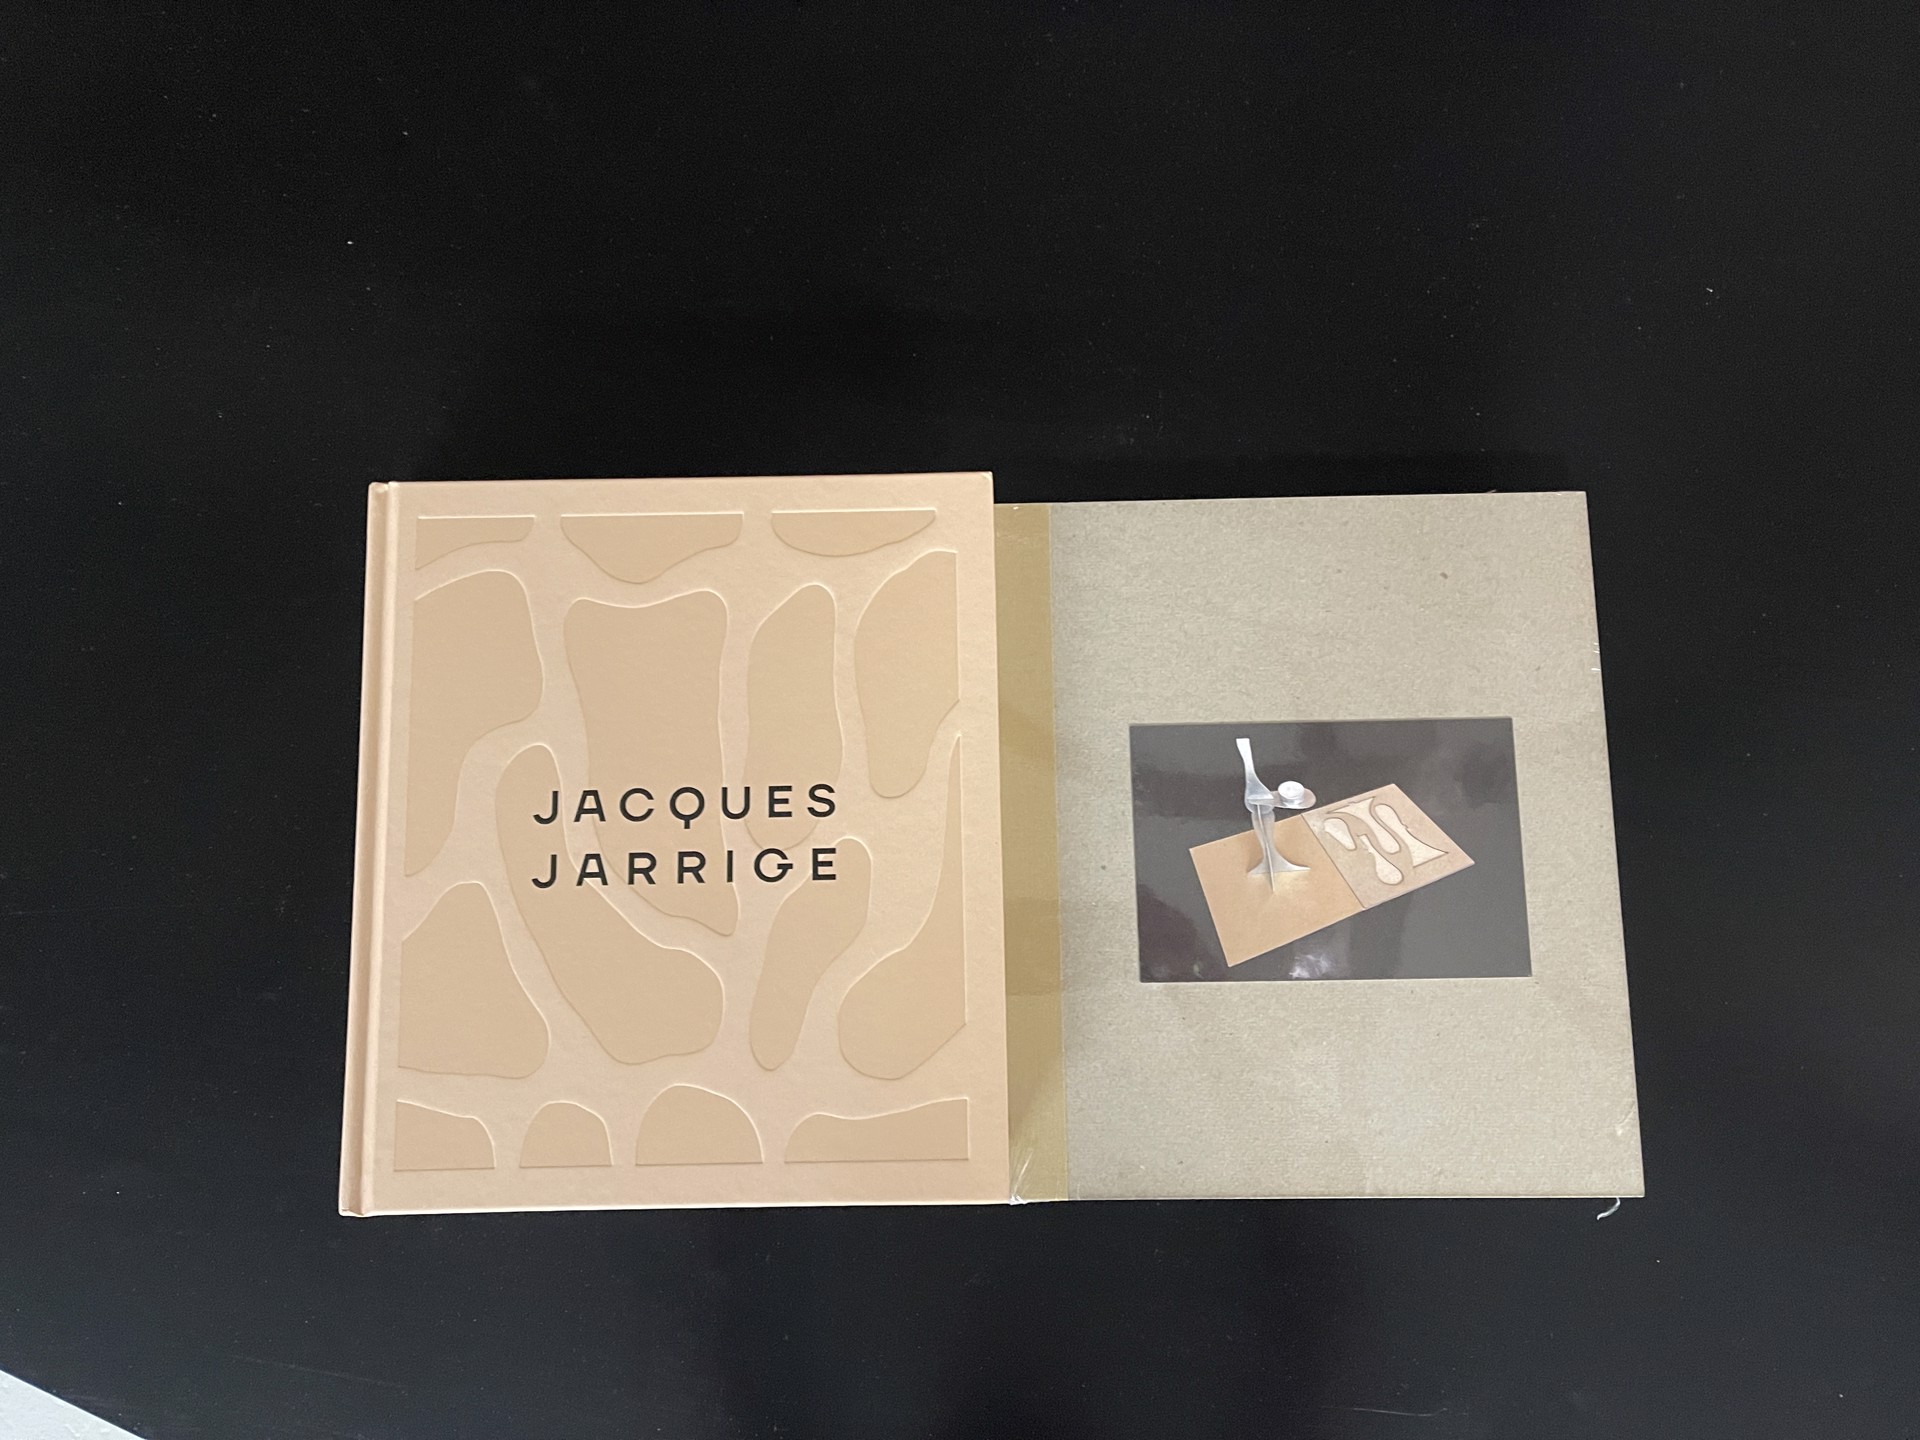 Collector's  limited edition book Jacques Jarrige with Candleholder by Jacques Jarrige